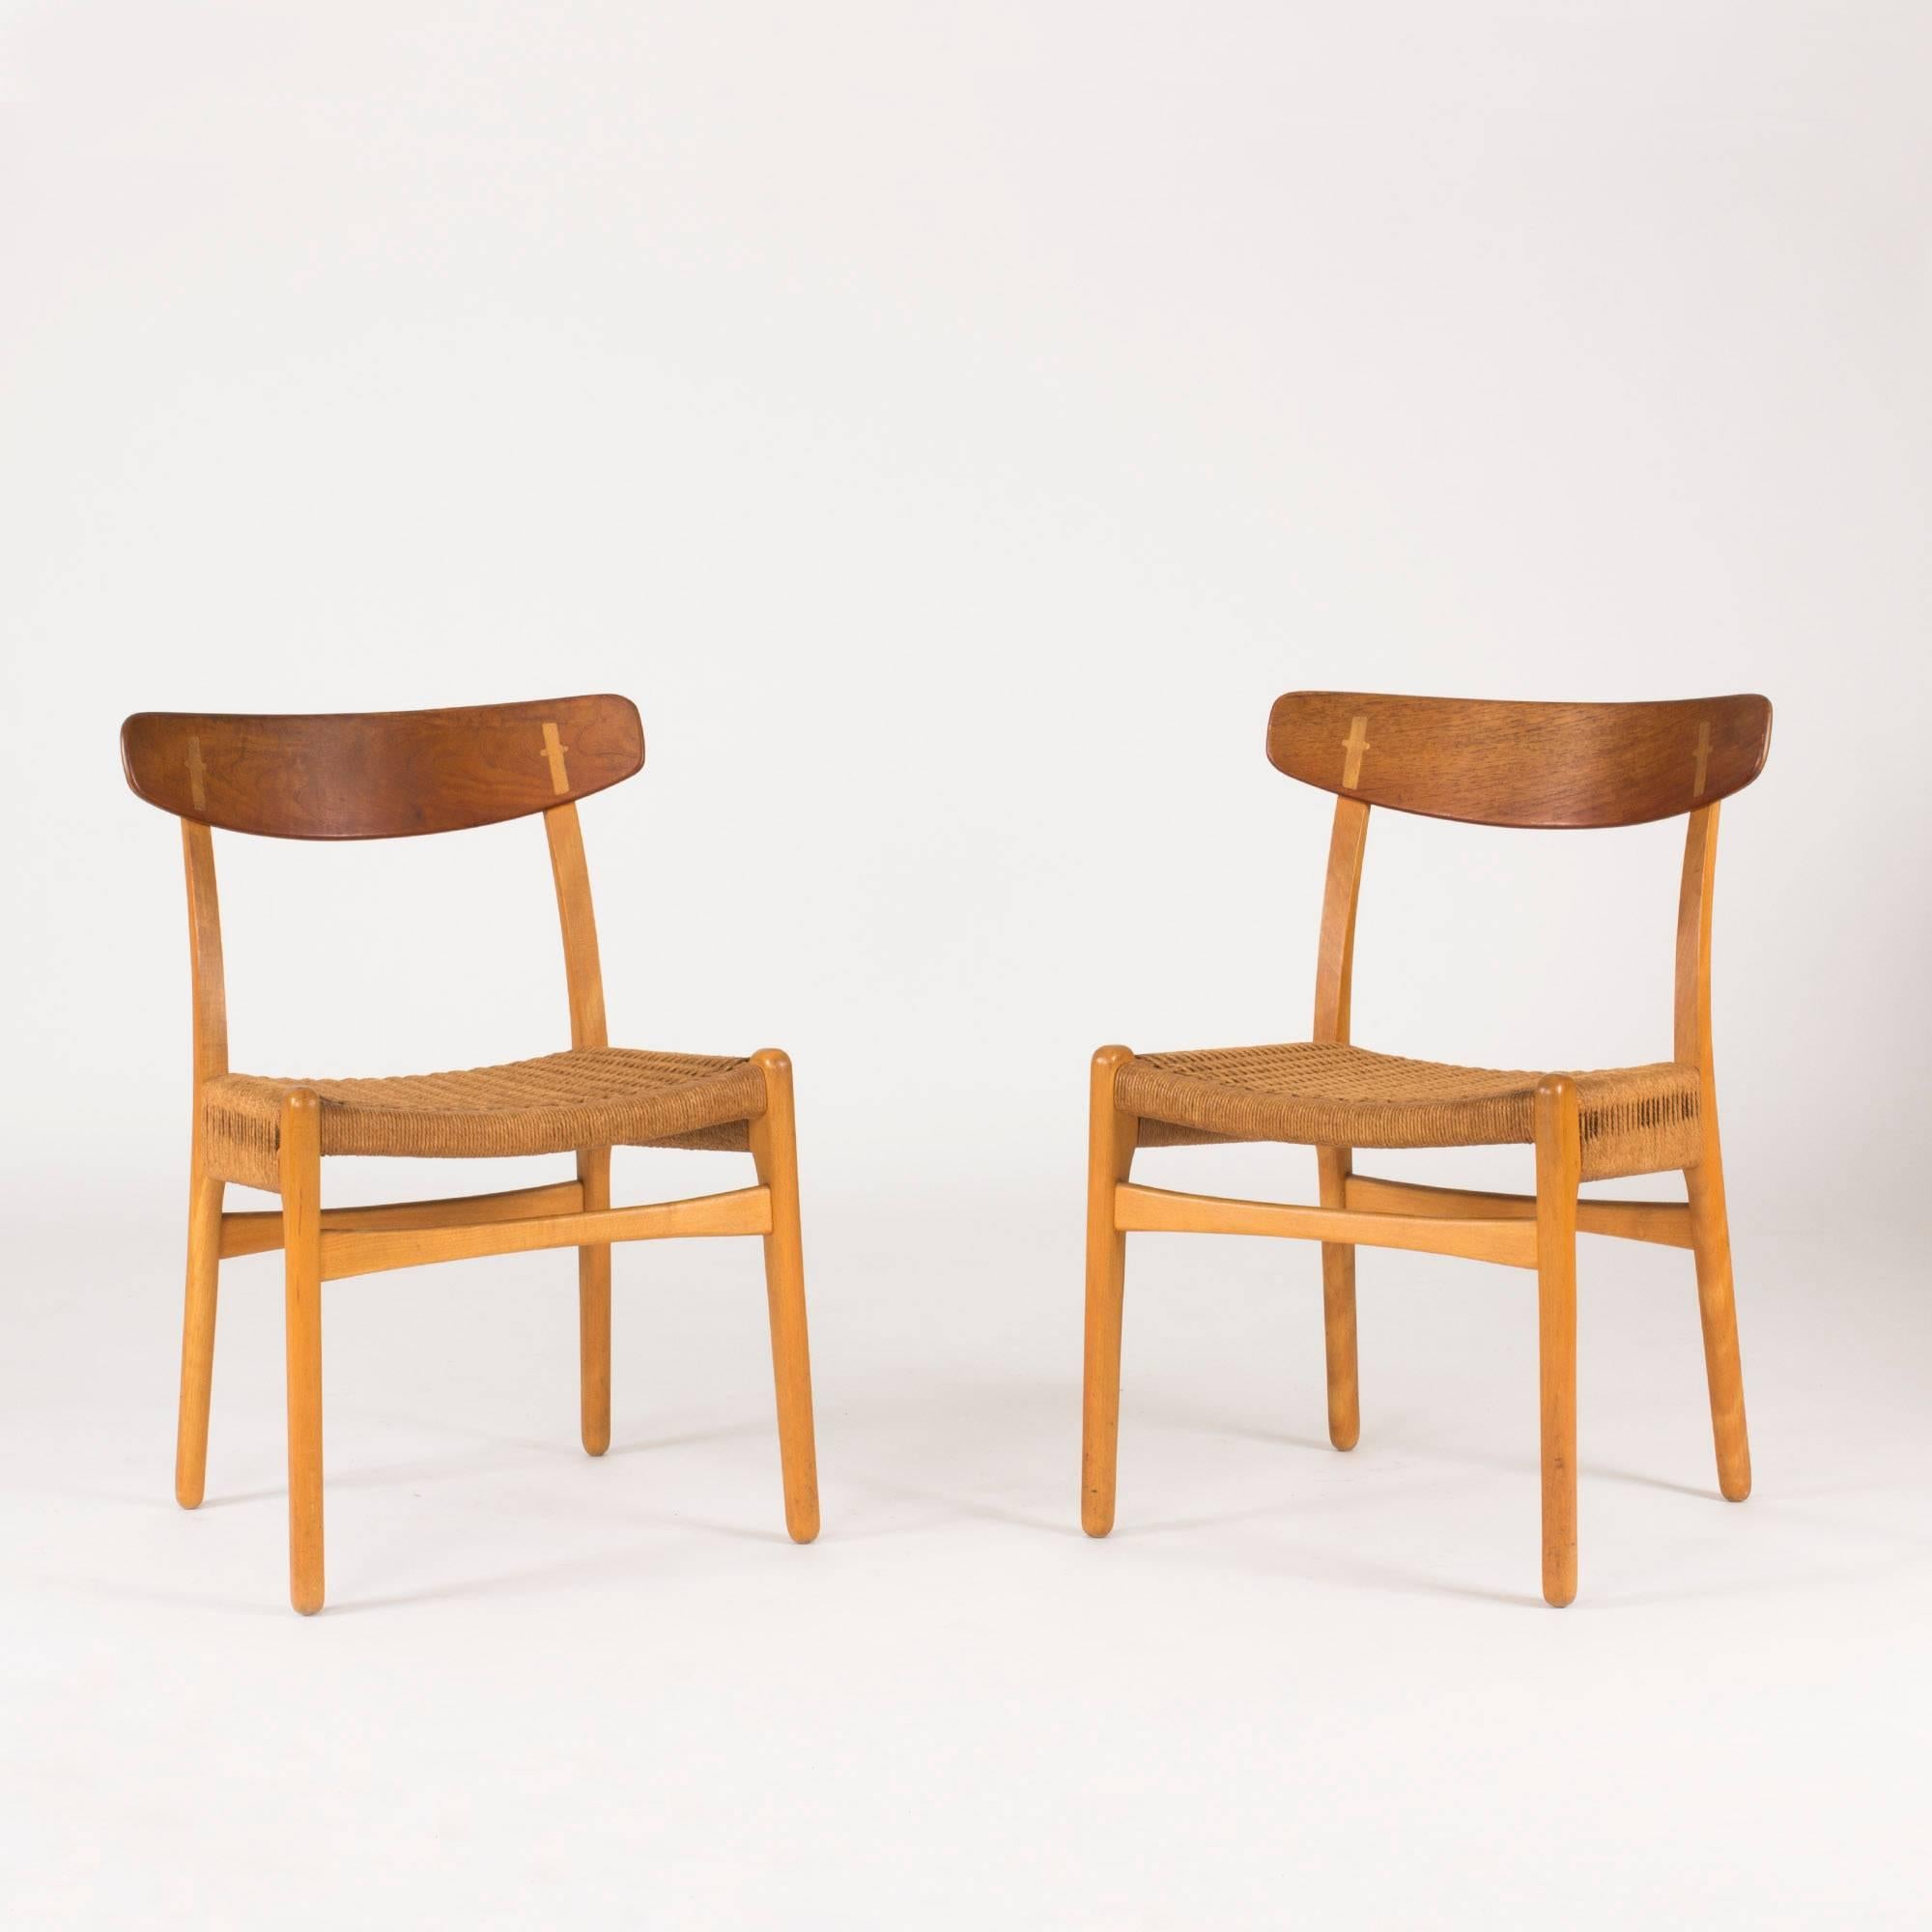 Set of wonderful “CH 23” dining chairs by Hans J. Wegner. Oak bases and teak back rests, paper cord seats.